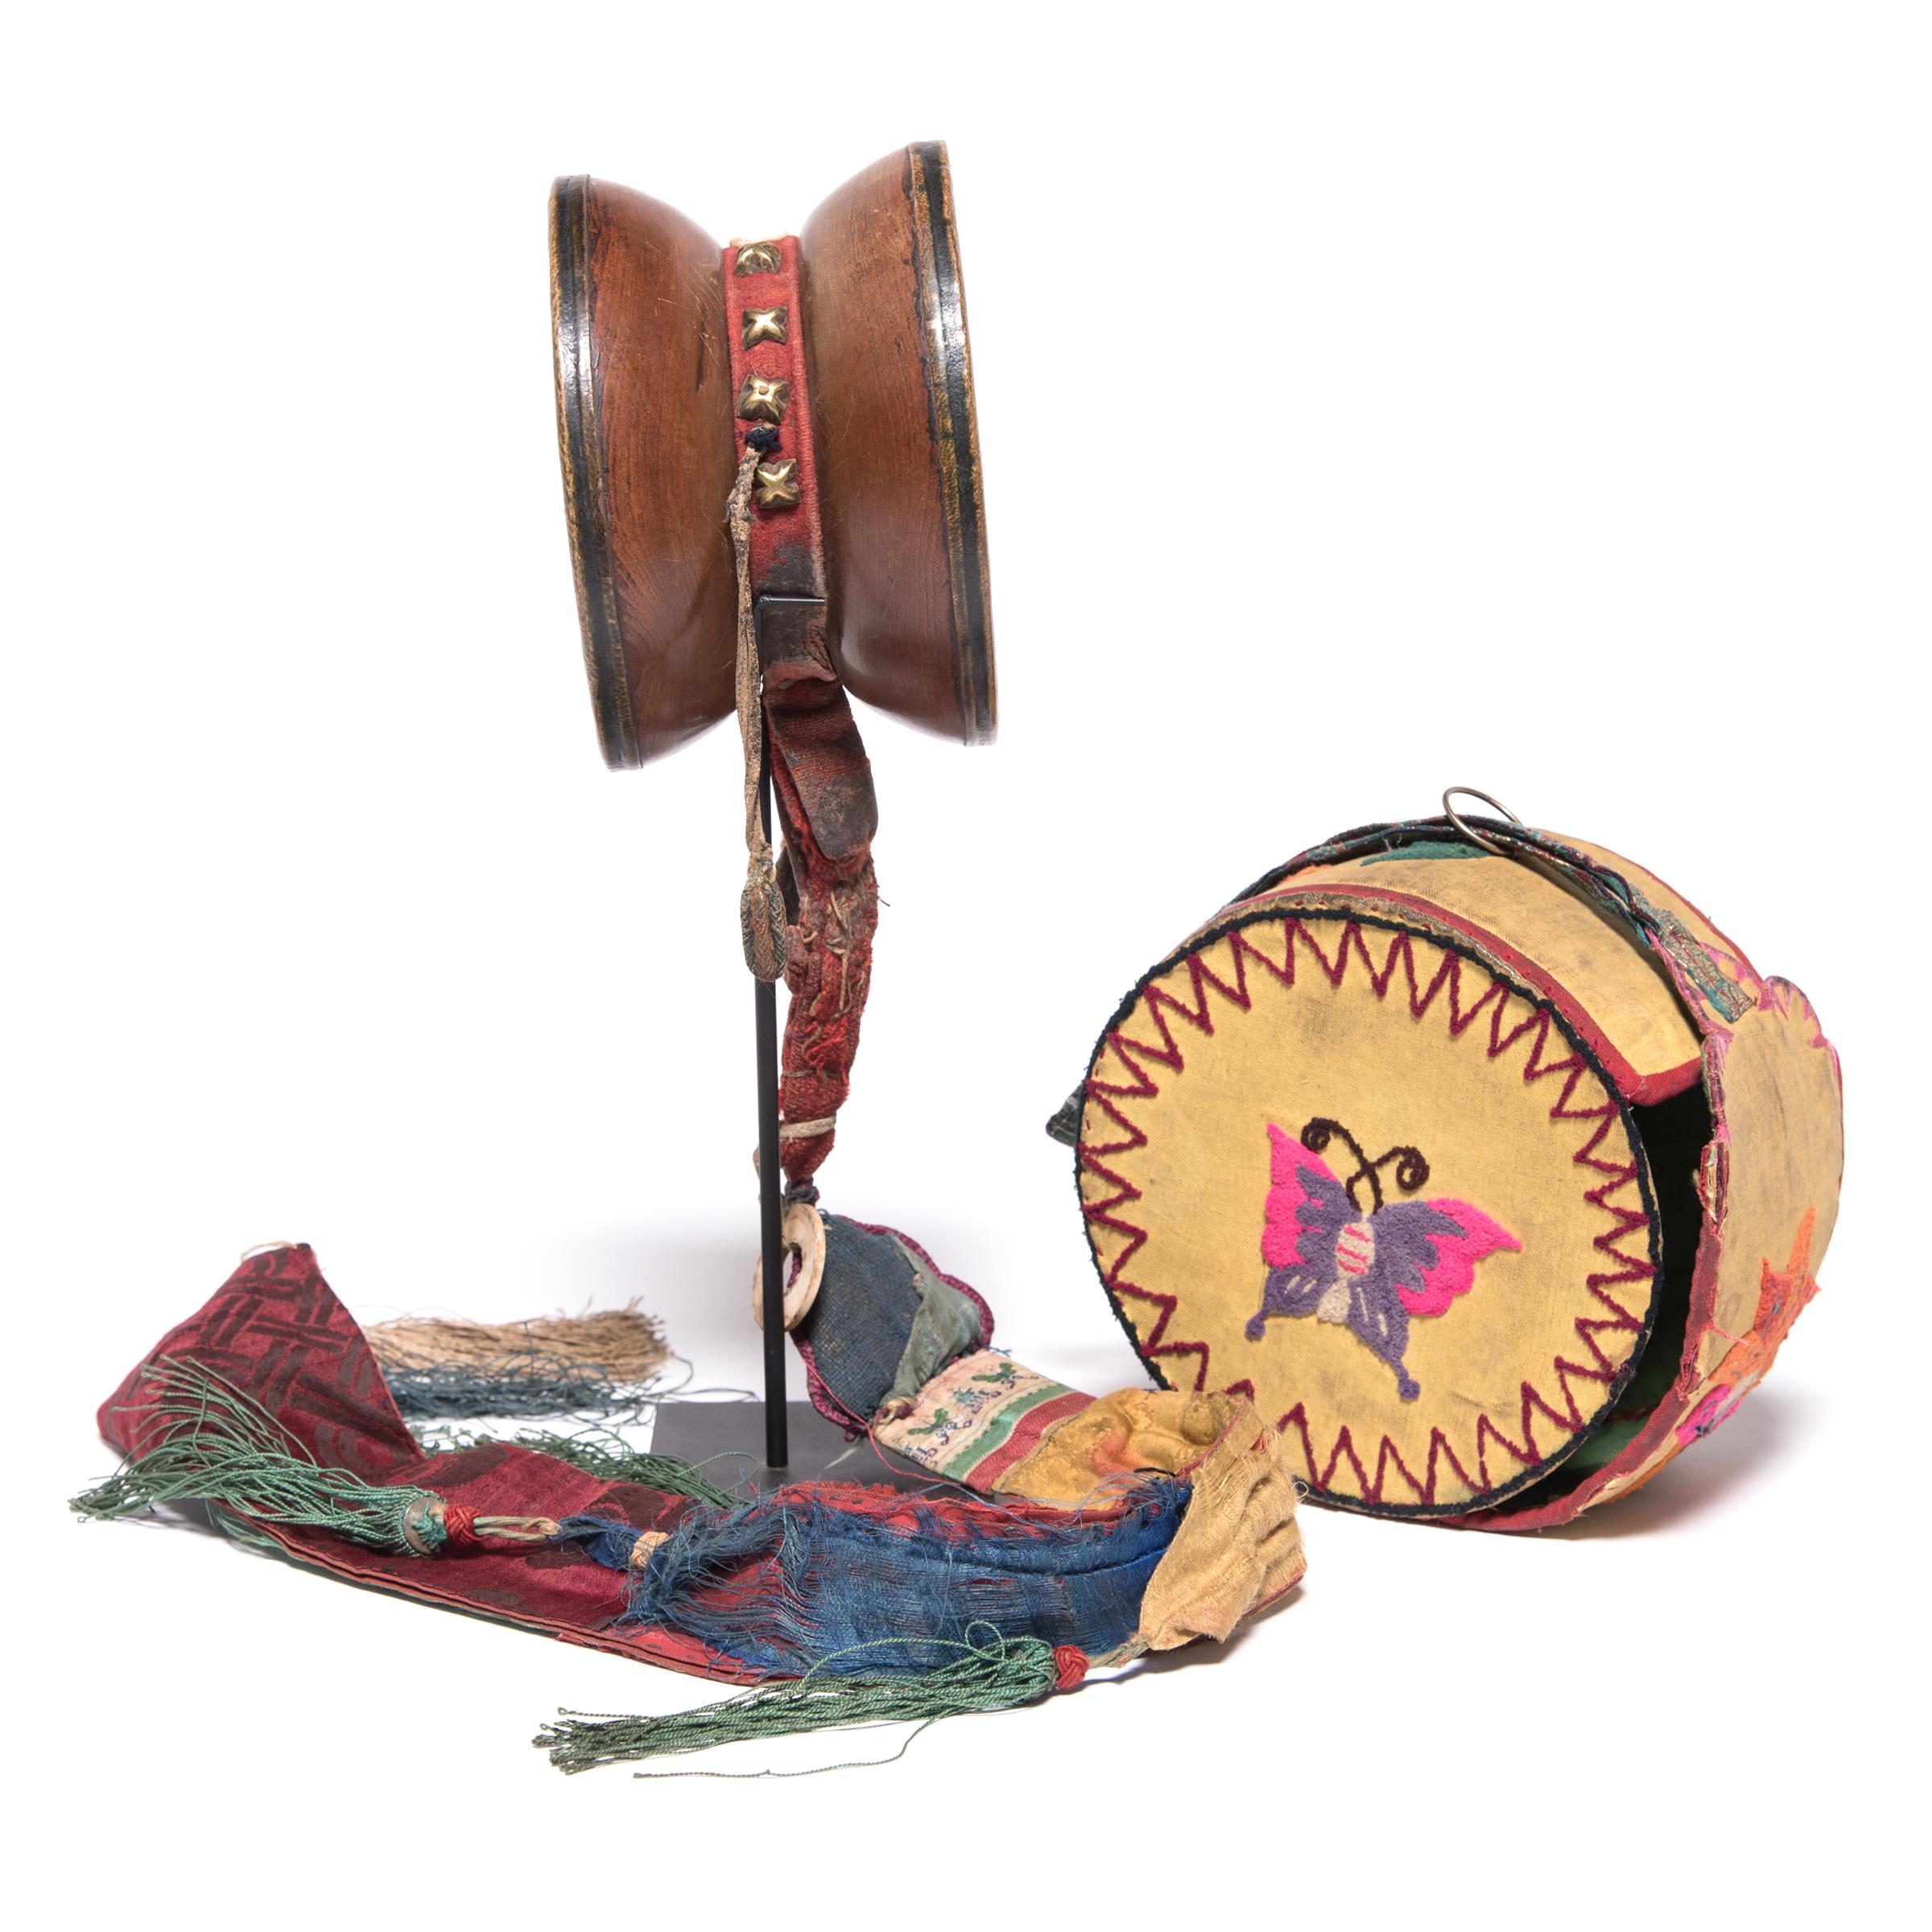 Vibrantly colored and intricately decorated, this small two-headed drum is a 19th-century Tibetan damaru, a hand-held instrument used in tantric practices within Tibetan Buddhism. Carved into an hourglass shape, this wooden drum is modeled after the